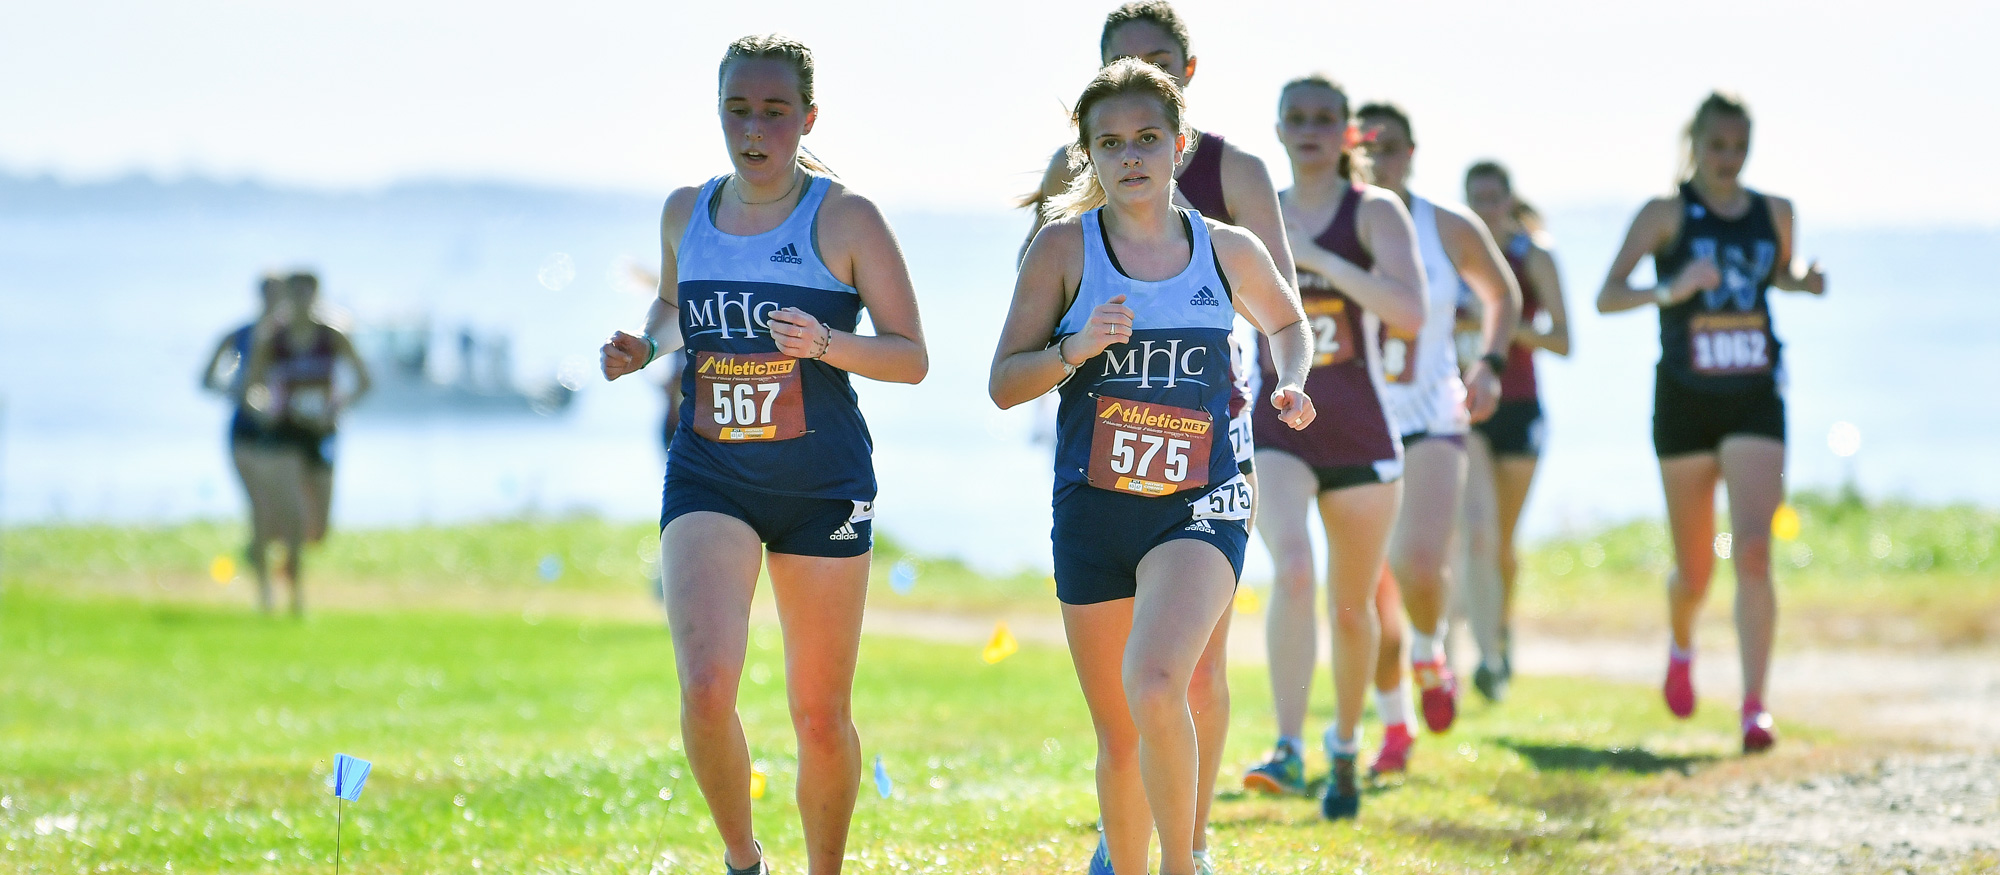 Bridget Hall (left) and Greta Trapp (center) finished second and first, respectively, for Mount Holyoke in the "White Race" at the Connecticut College Invitational on Oct. 15, 2022. (Bob Blanchard/RJB Sports)